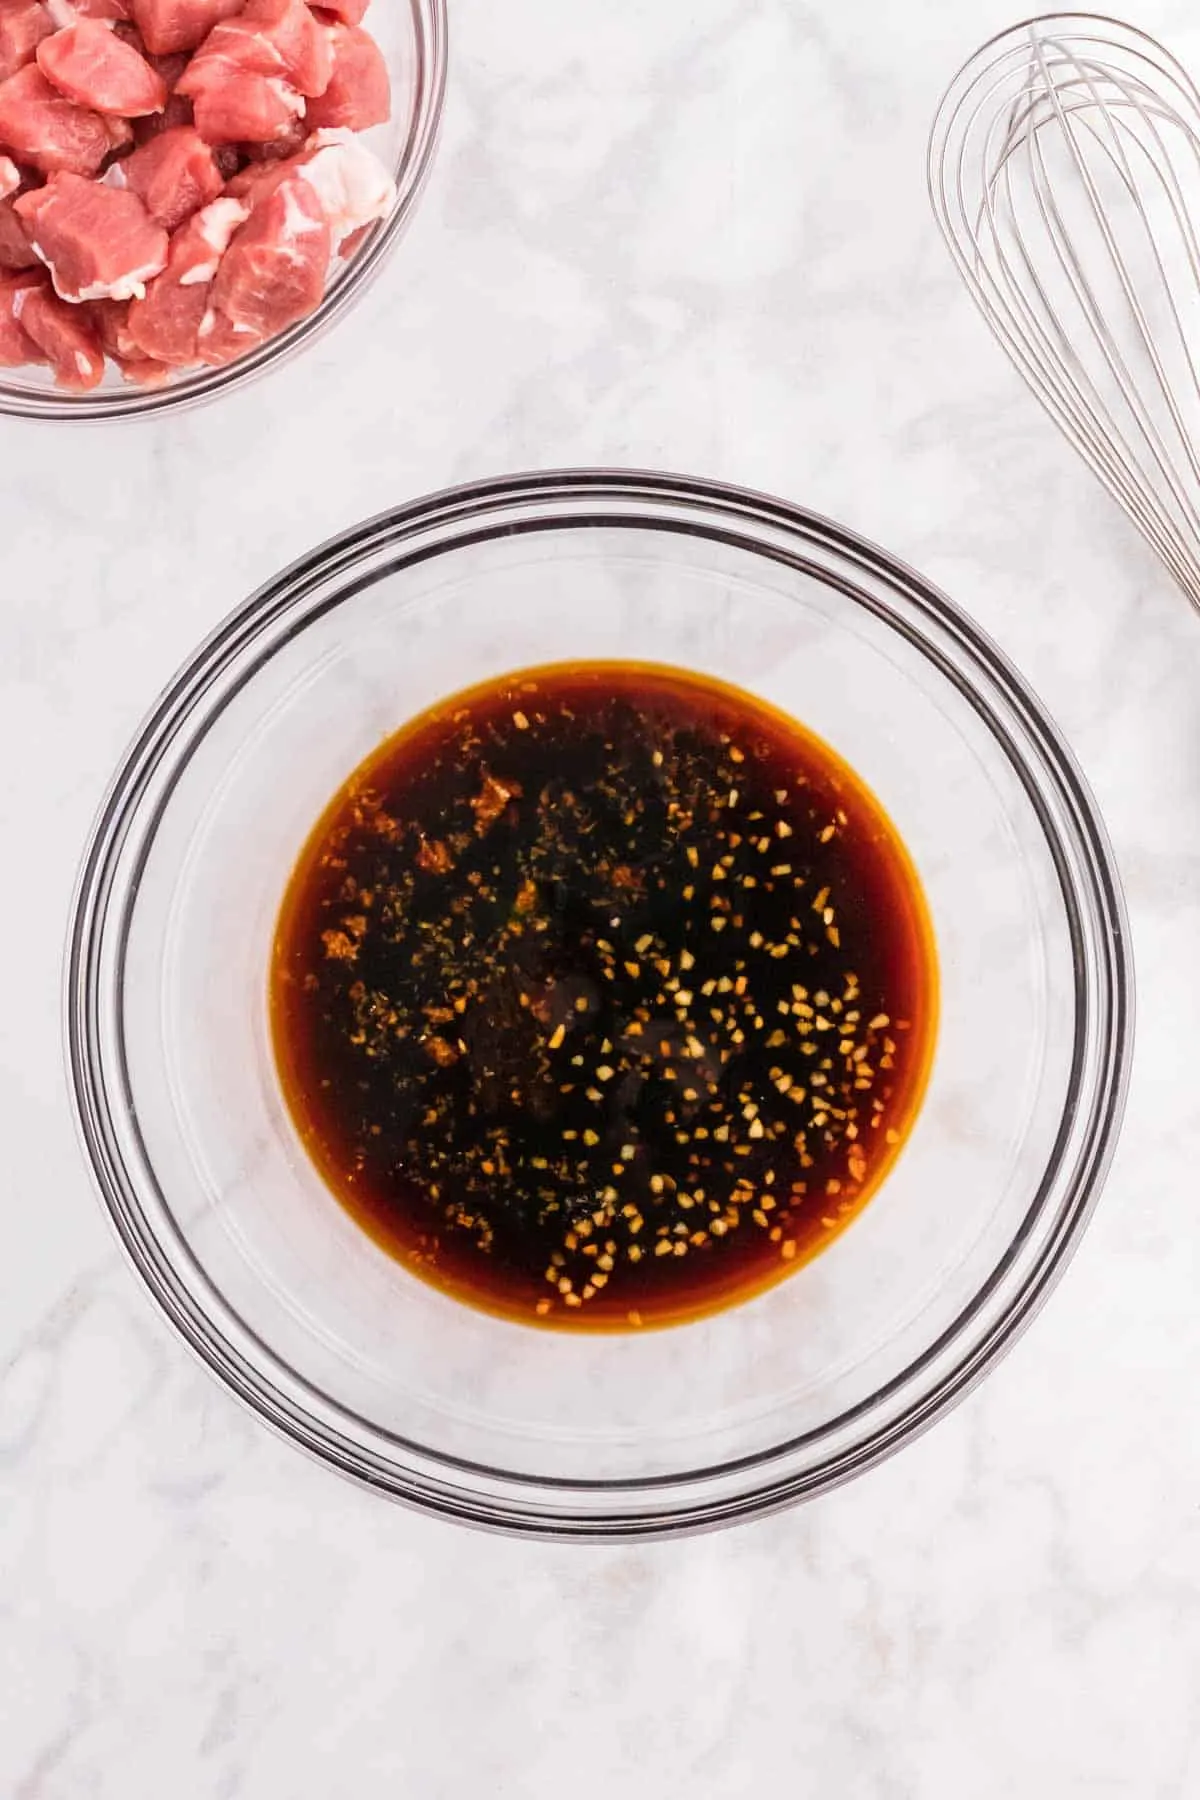 soy sauce, hoisin sauce, brown sugar, ginger and garlic in a mixing bowl